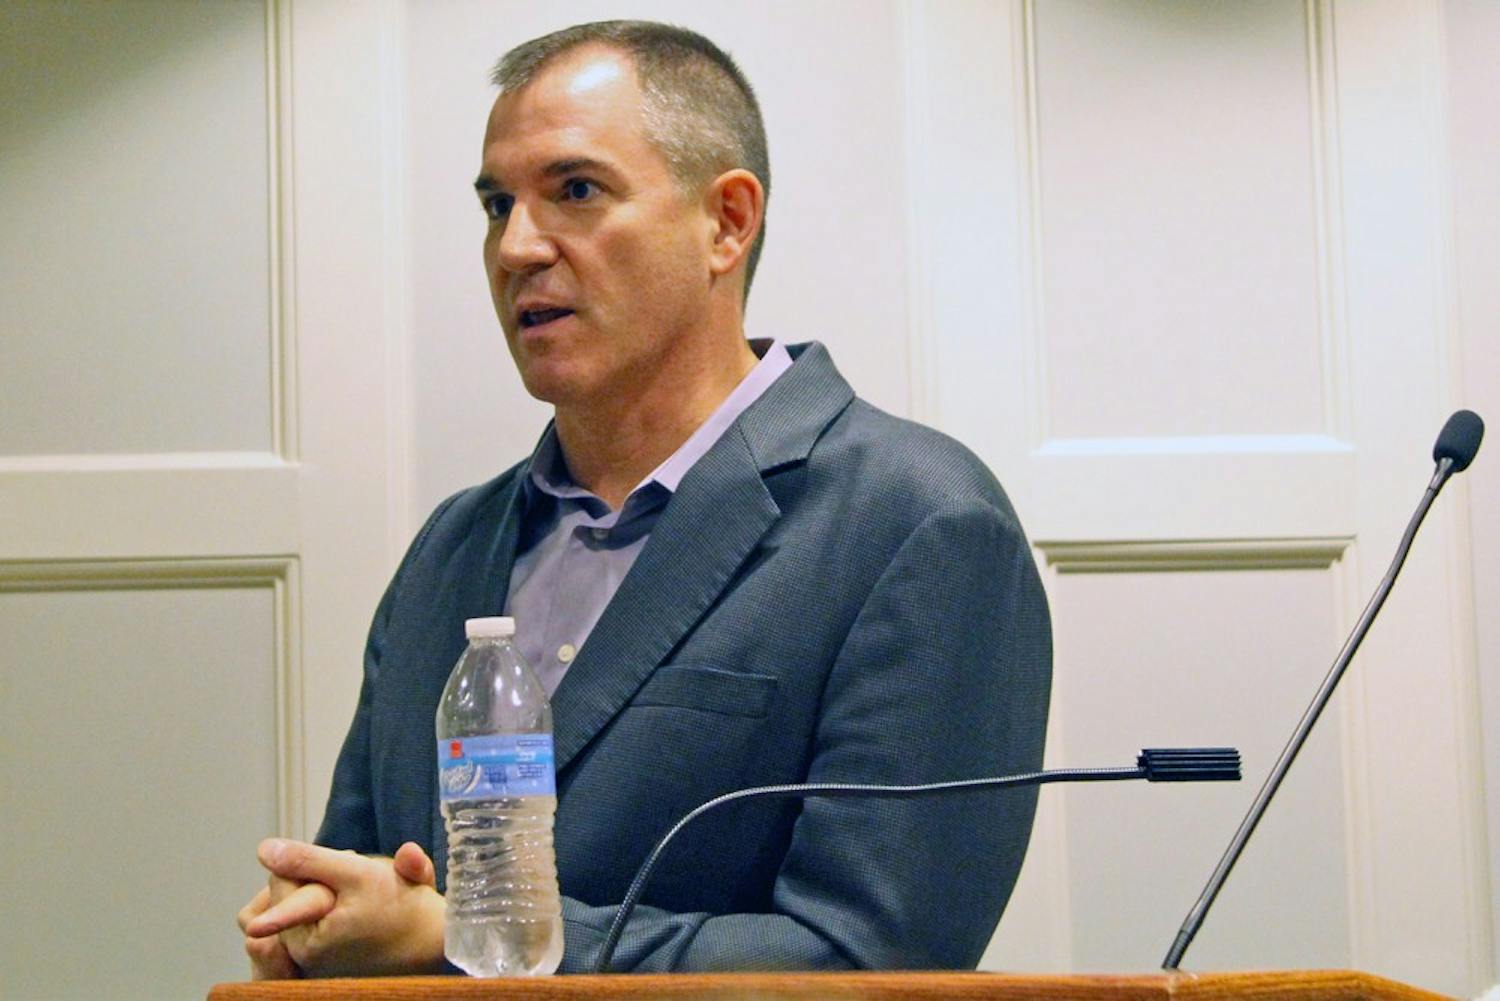 Frank Bruni, UNC Alumnus and current op-ed columnist for the New York Times, answers questions after a speech.